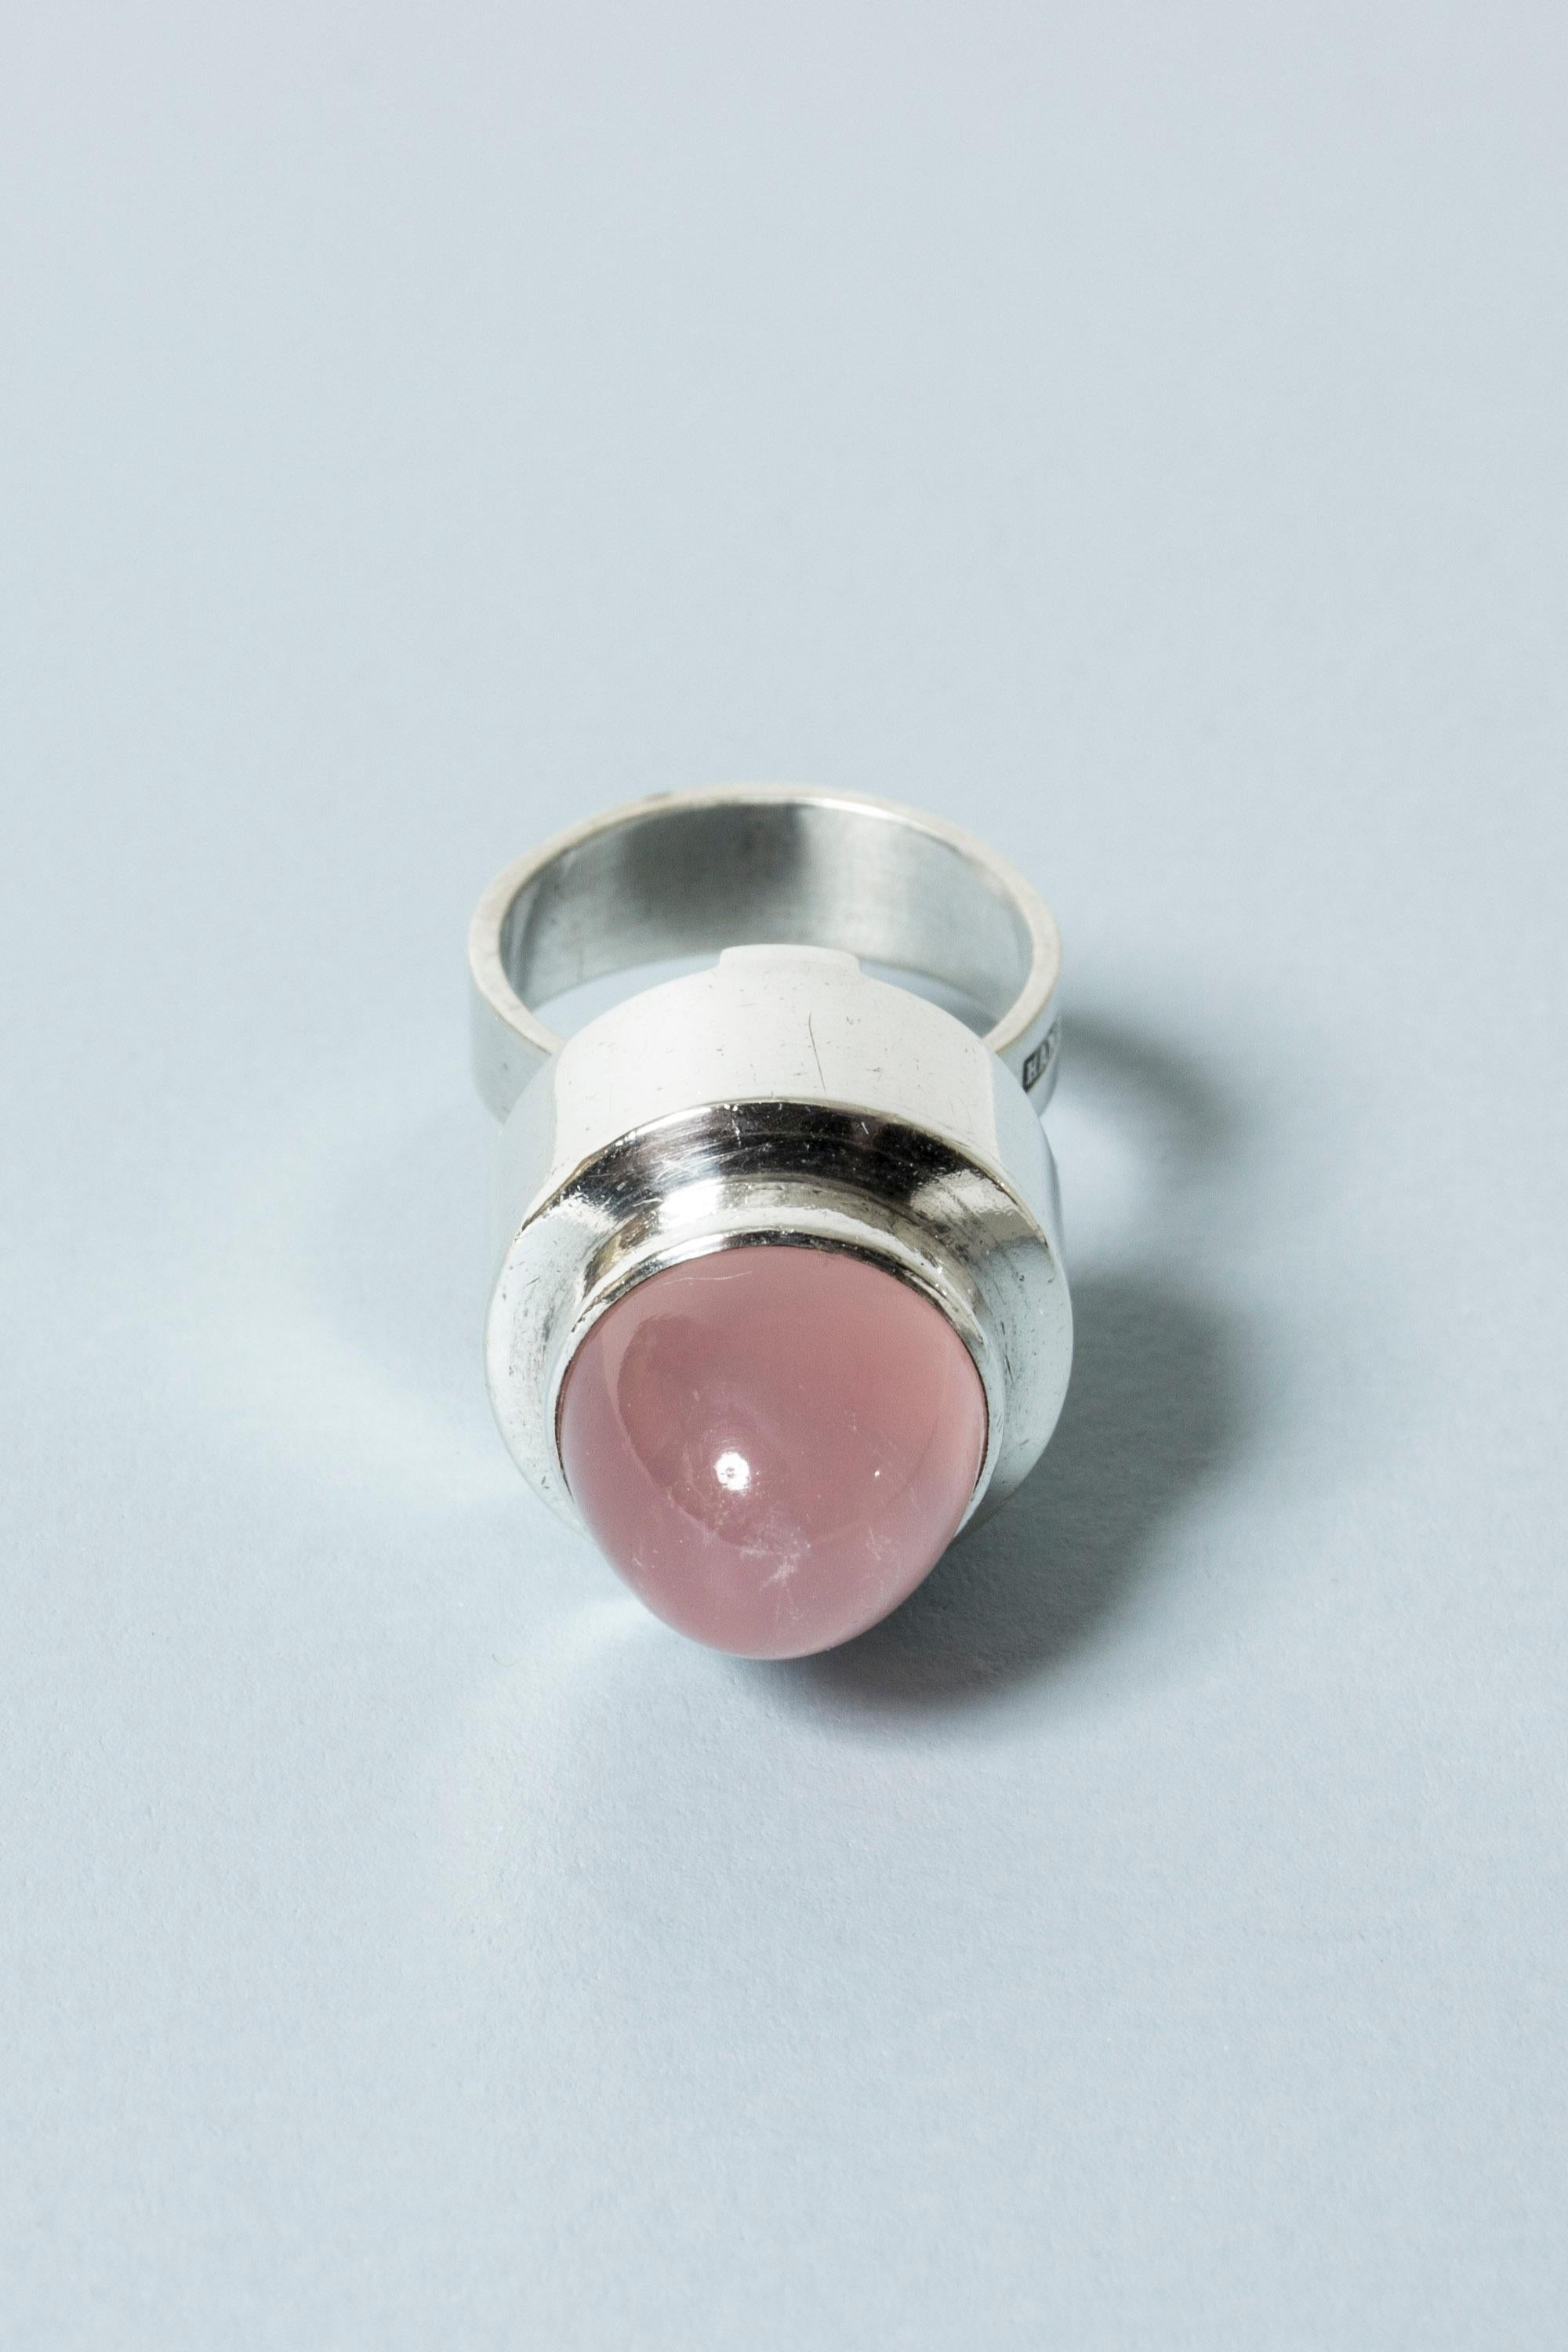 Beautiful silver ring from Hansen, in a cool, streamlined design with space age vibes. Bullet cut rose quartz stone.